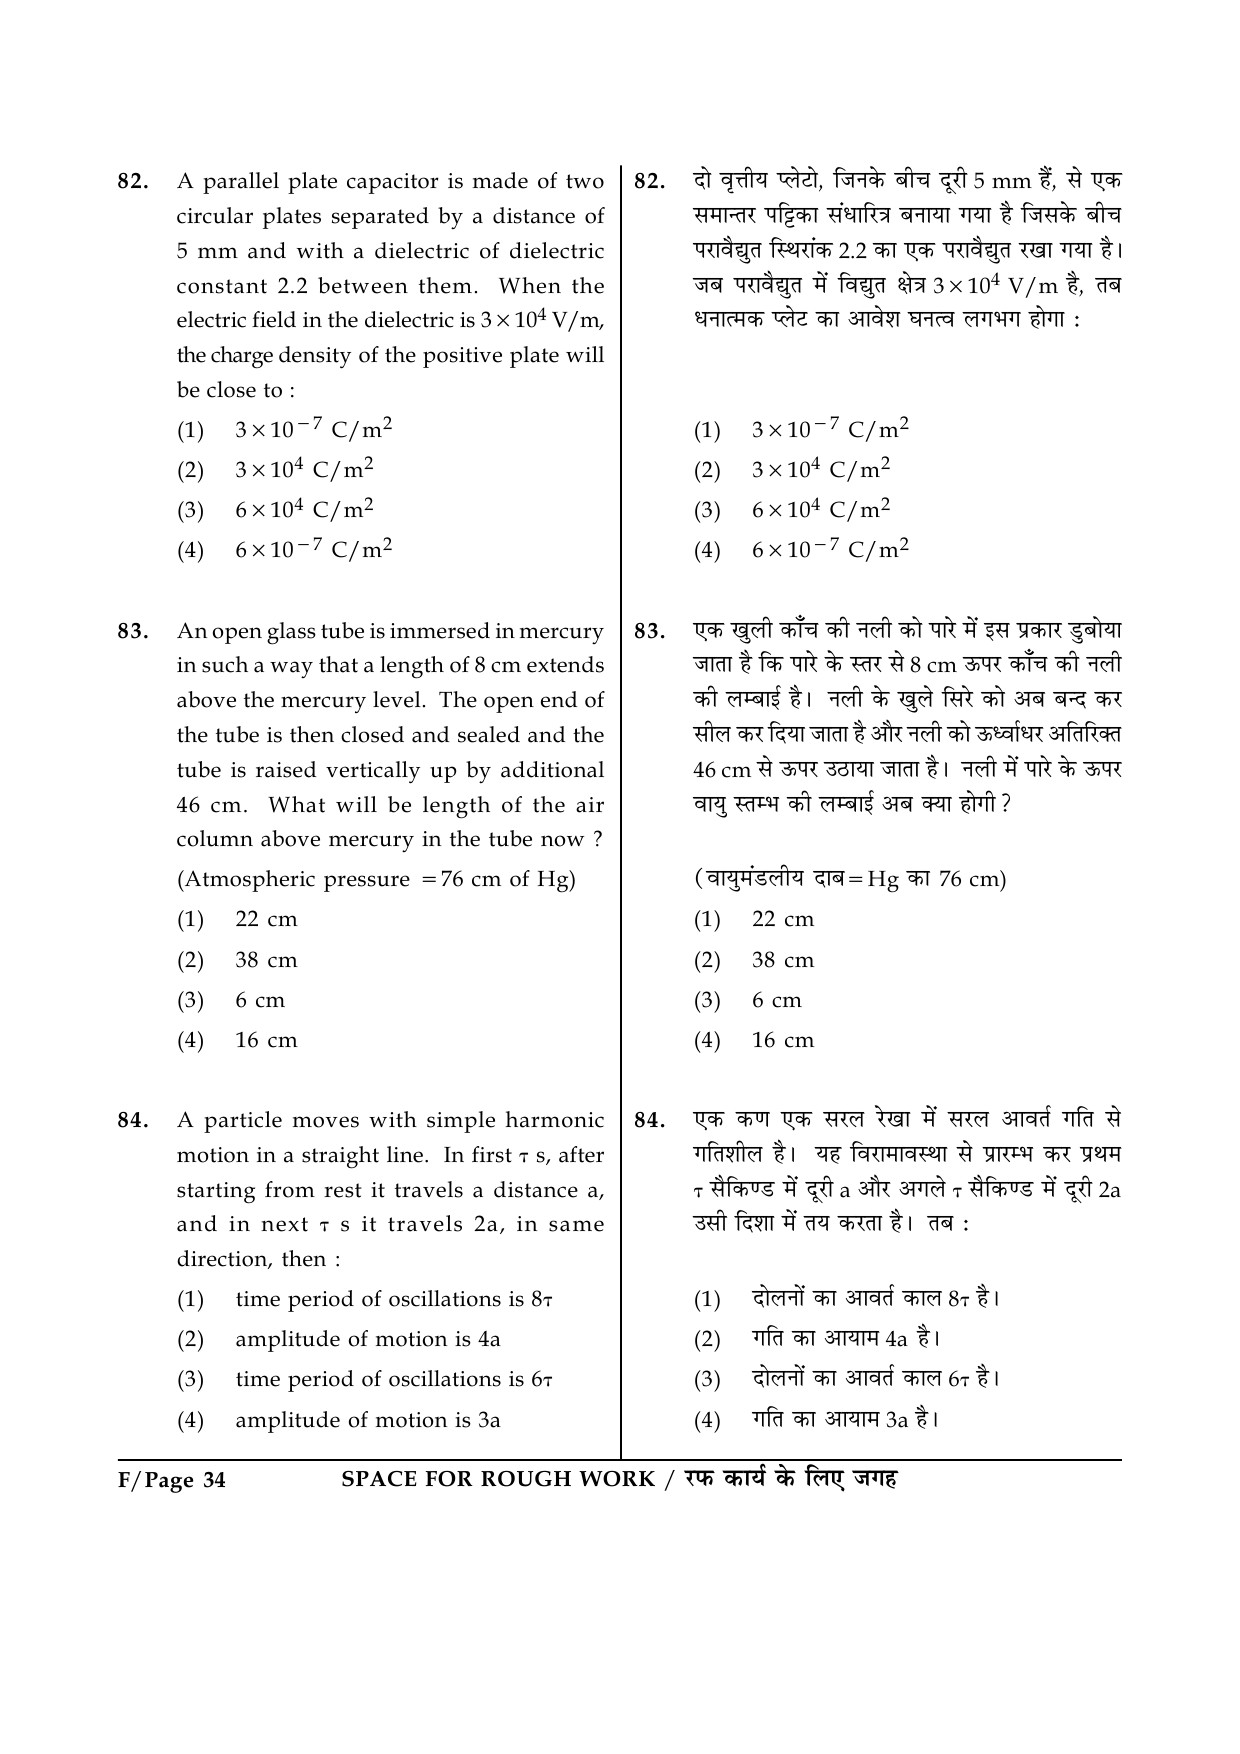 JEE Main Exam Question Paper 2014 Booklet F 34